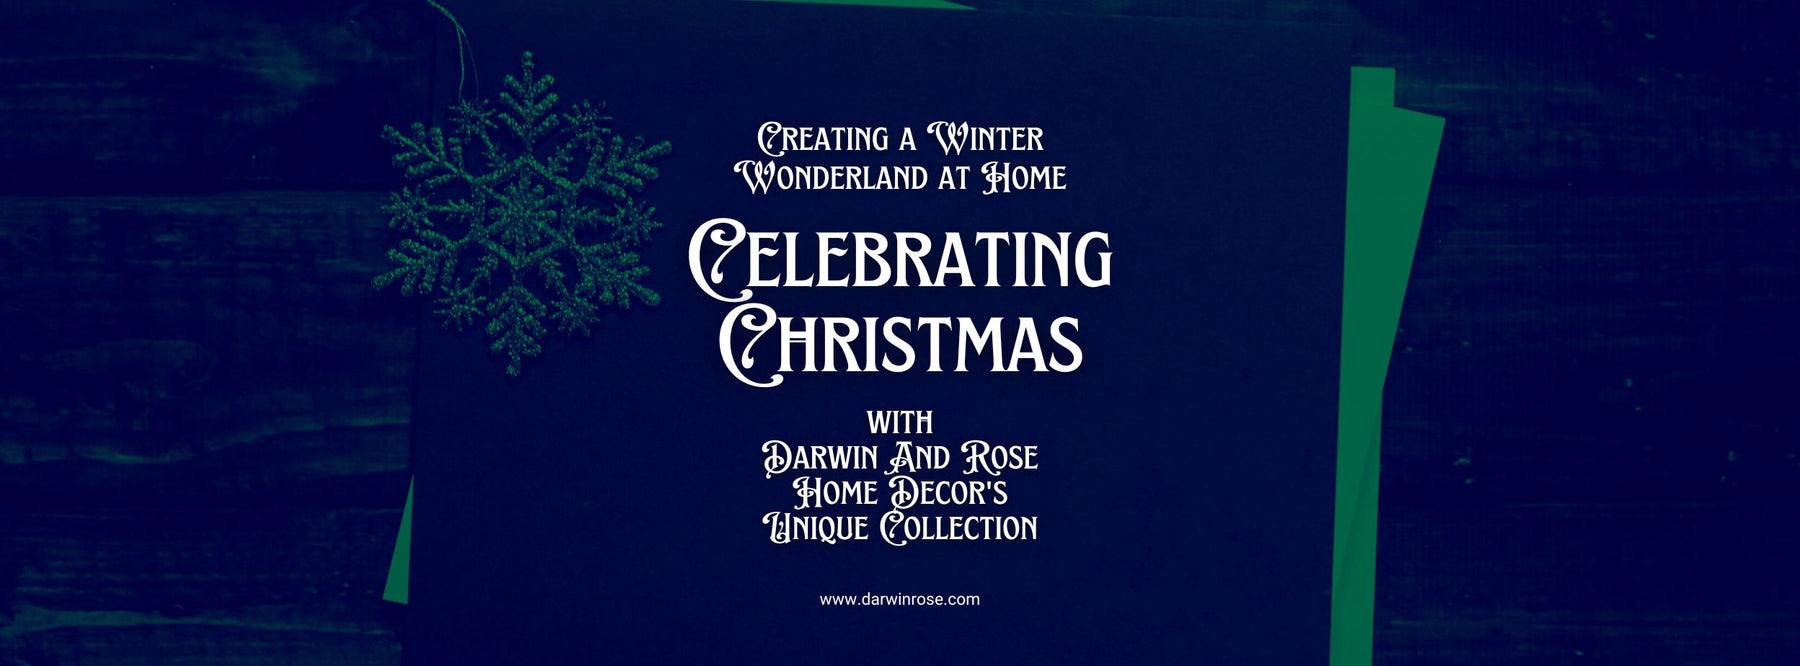 Creating a Winter Wonderland at Home: Celebrating Christmas with Darwin And Rose Home Decor's Unique Collection